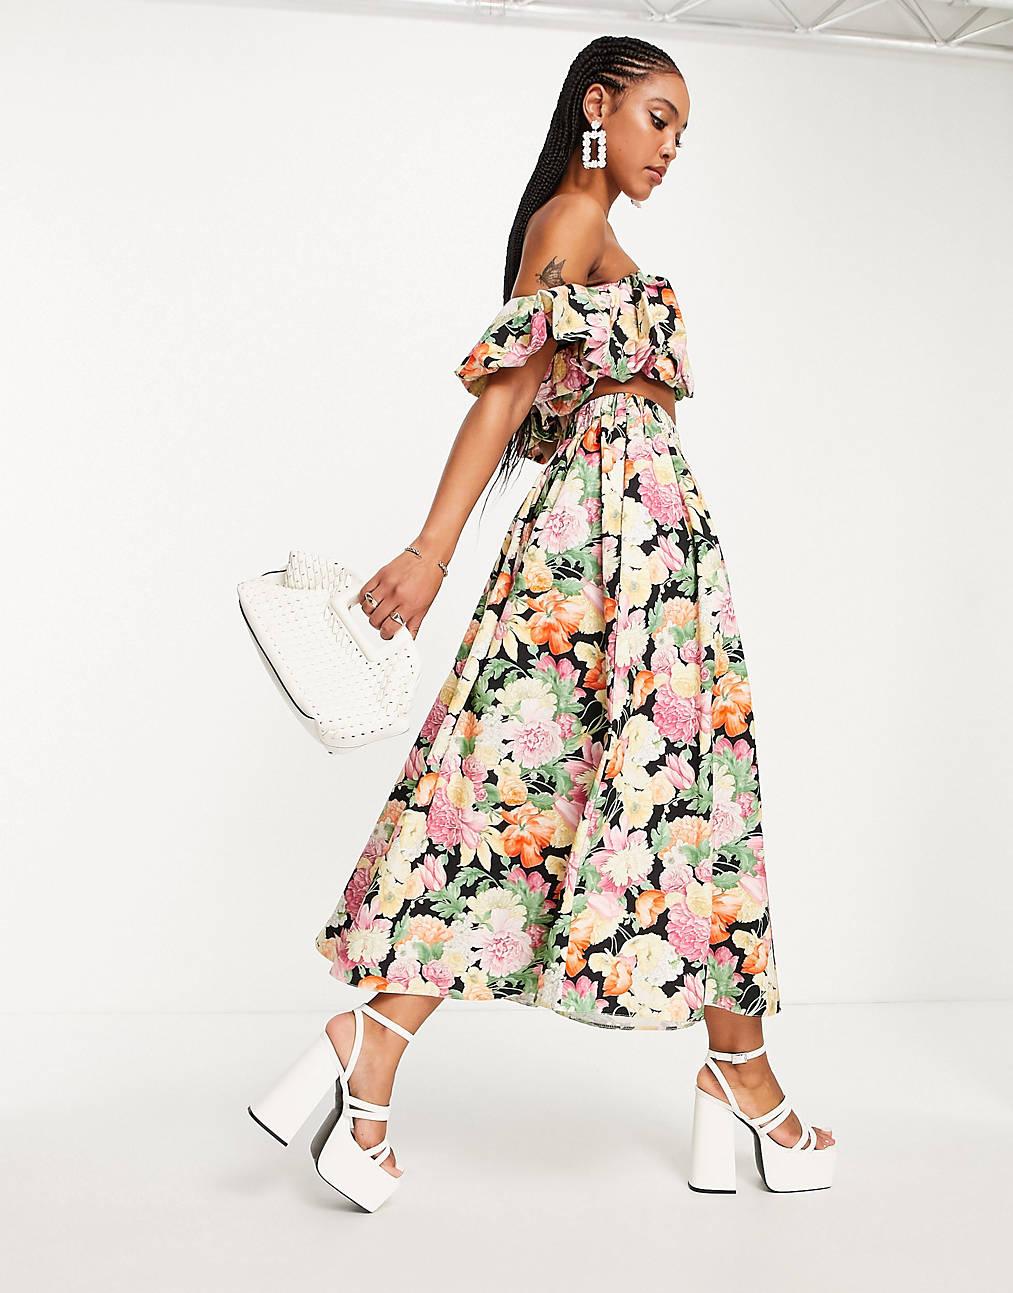 Best-Dressed Guest: What to Wear to a Spring Wedding — Neutrally